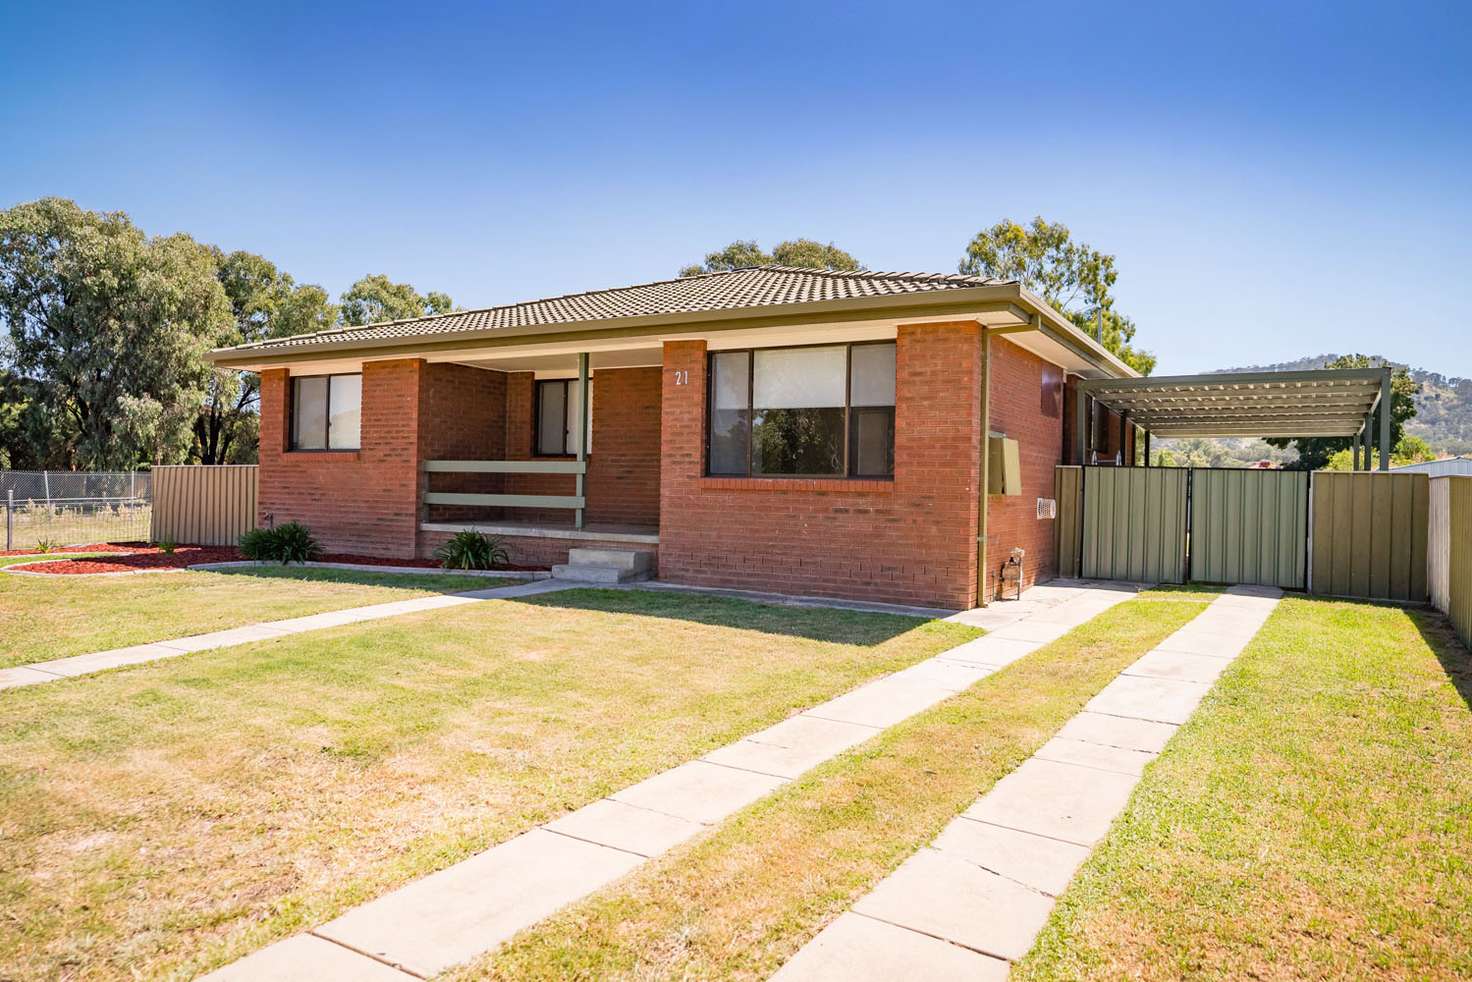 Main view of Homely house listing, 21 MCMASTER AVENUE, Lavington NSW 2641